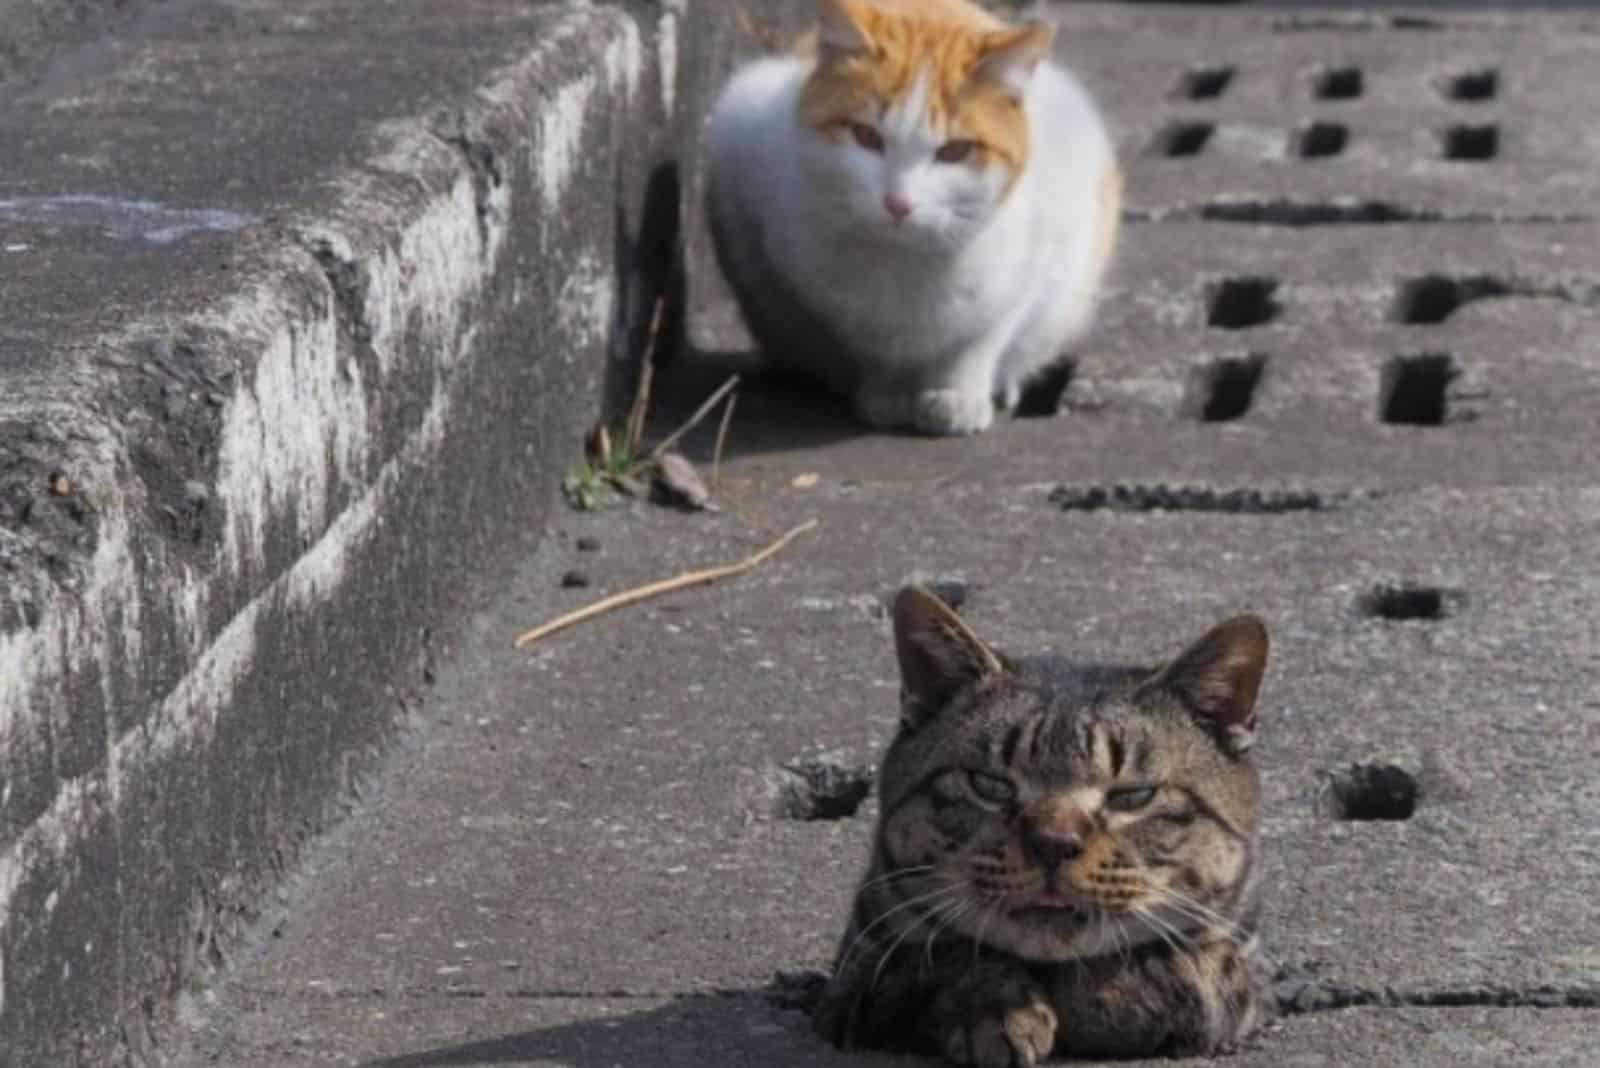 two stray cats having fun in the street